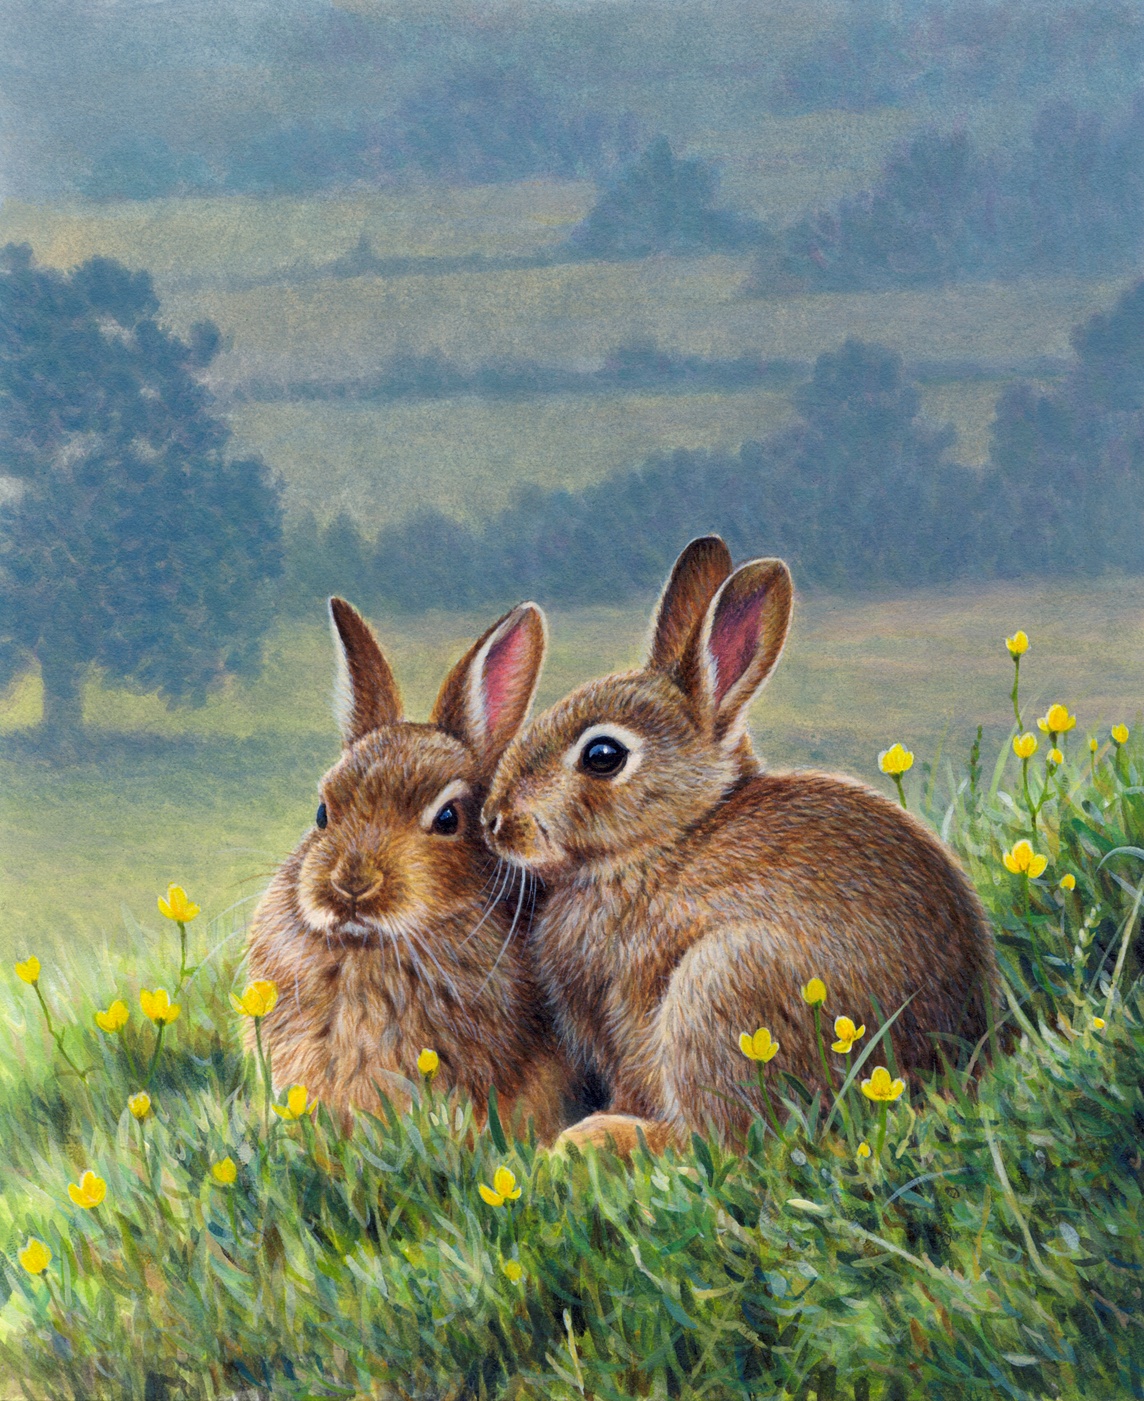 Two Brown Rabbits Huddling Together Among Buttercups In Countryside Stock Images